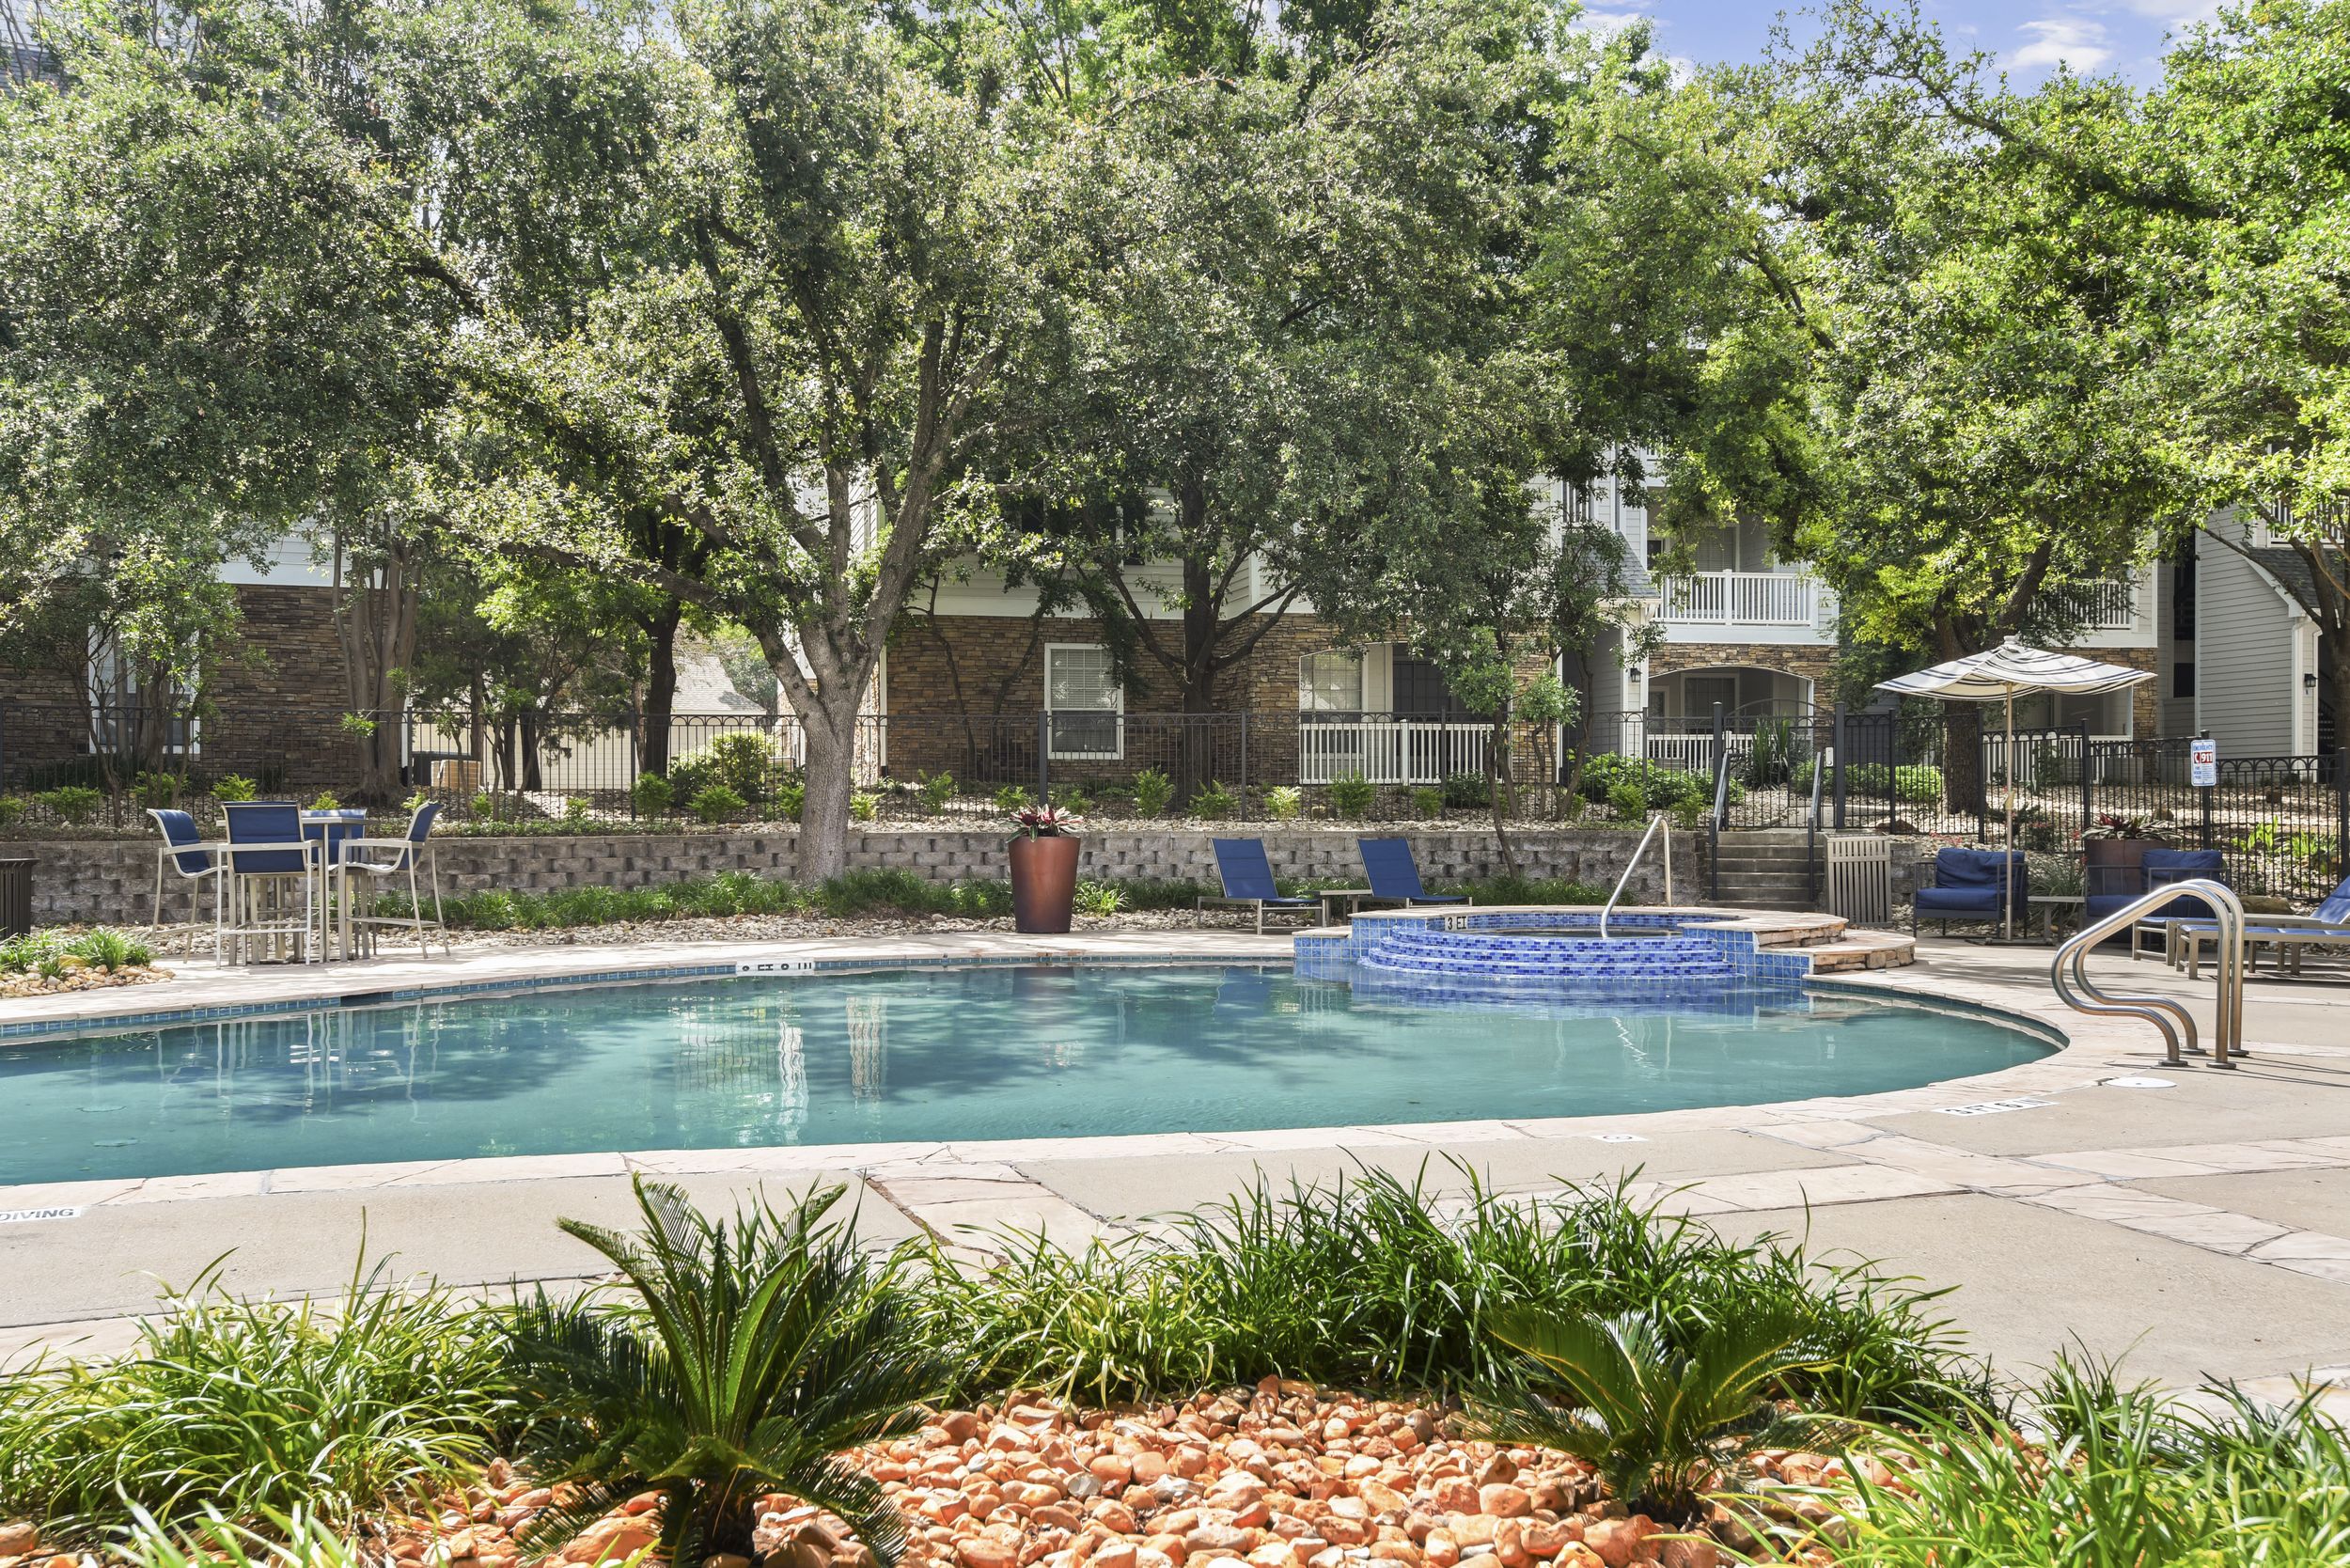 Classic swimming pool area with outdoor seating, pool umbrellas, and a hot tub at Lantower Round Rock.